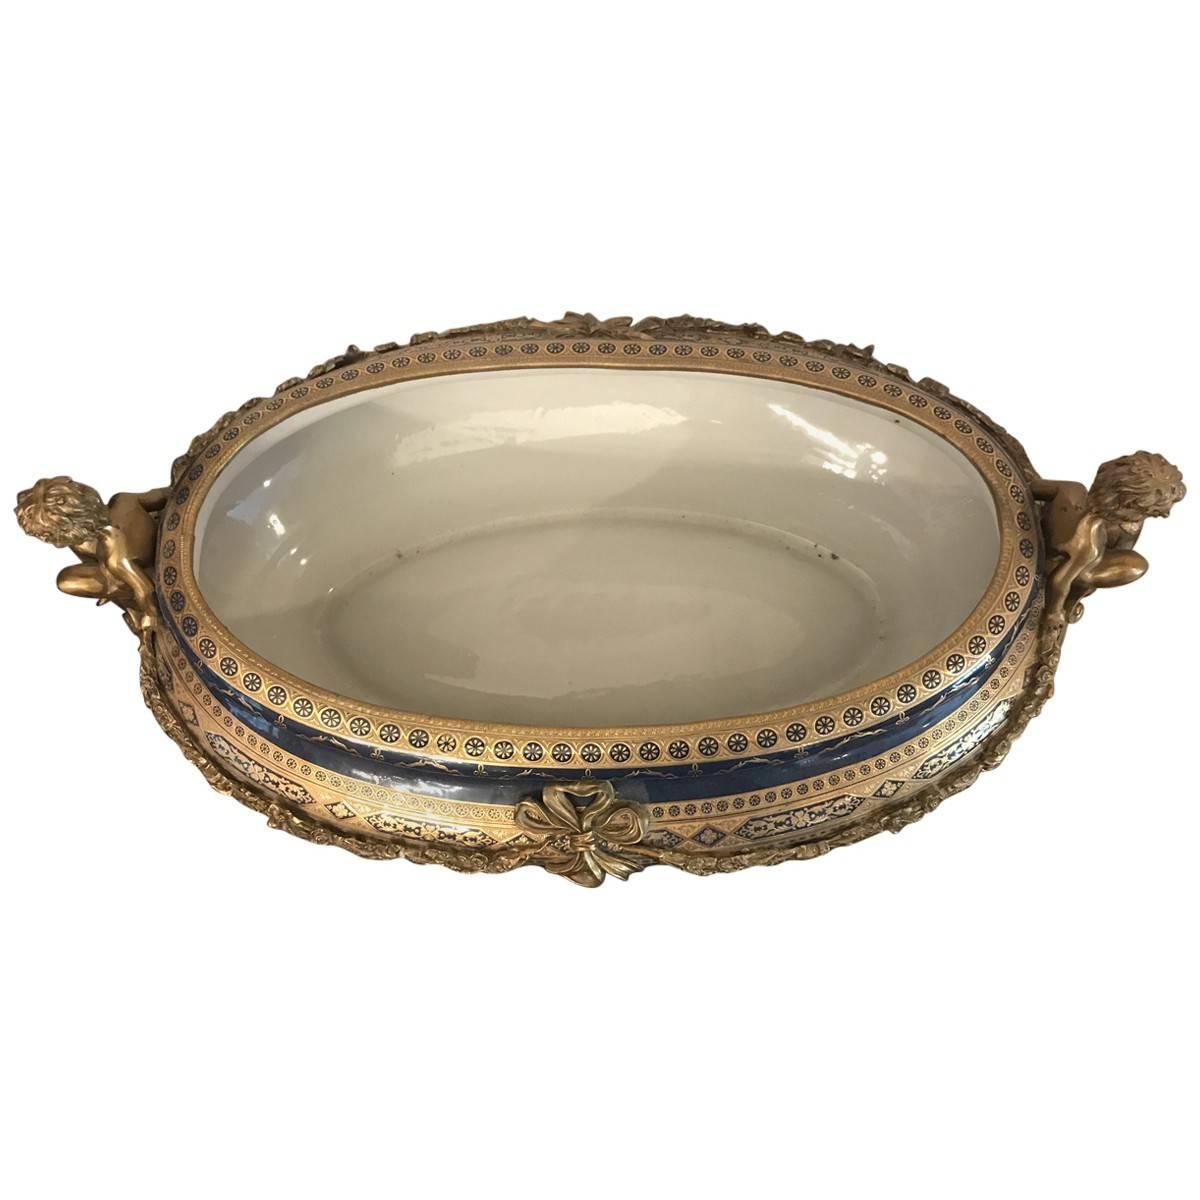 Timeless elegant and ornate centrepiece, this commanding porcelain bowl is mounted on an elaborately detailed bronze base. Cobalt glaze and gilt enamel highlights ensure this circa 20th century centre bowl looks sophisticated on any surface.